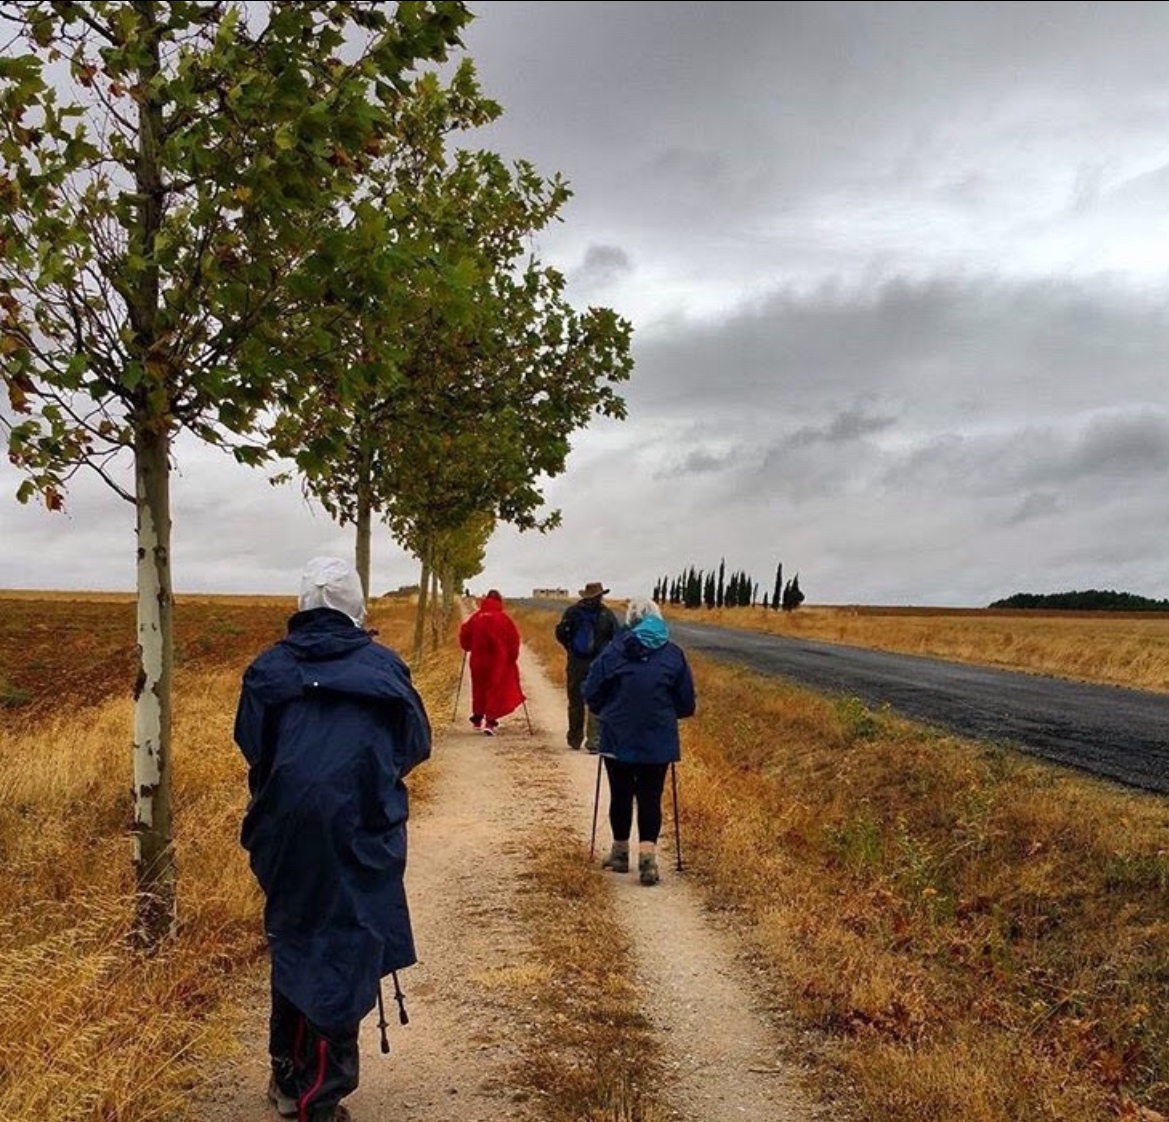 Where Will I be in My Camino Once I Walk 1 Million Steps?